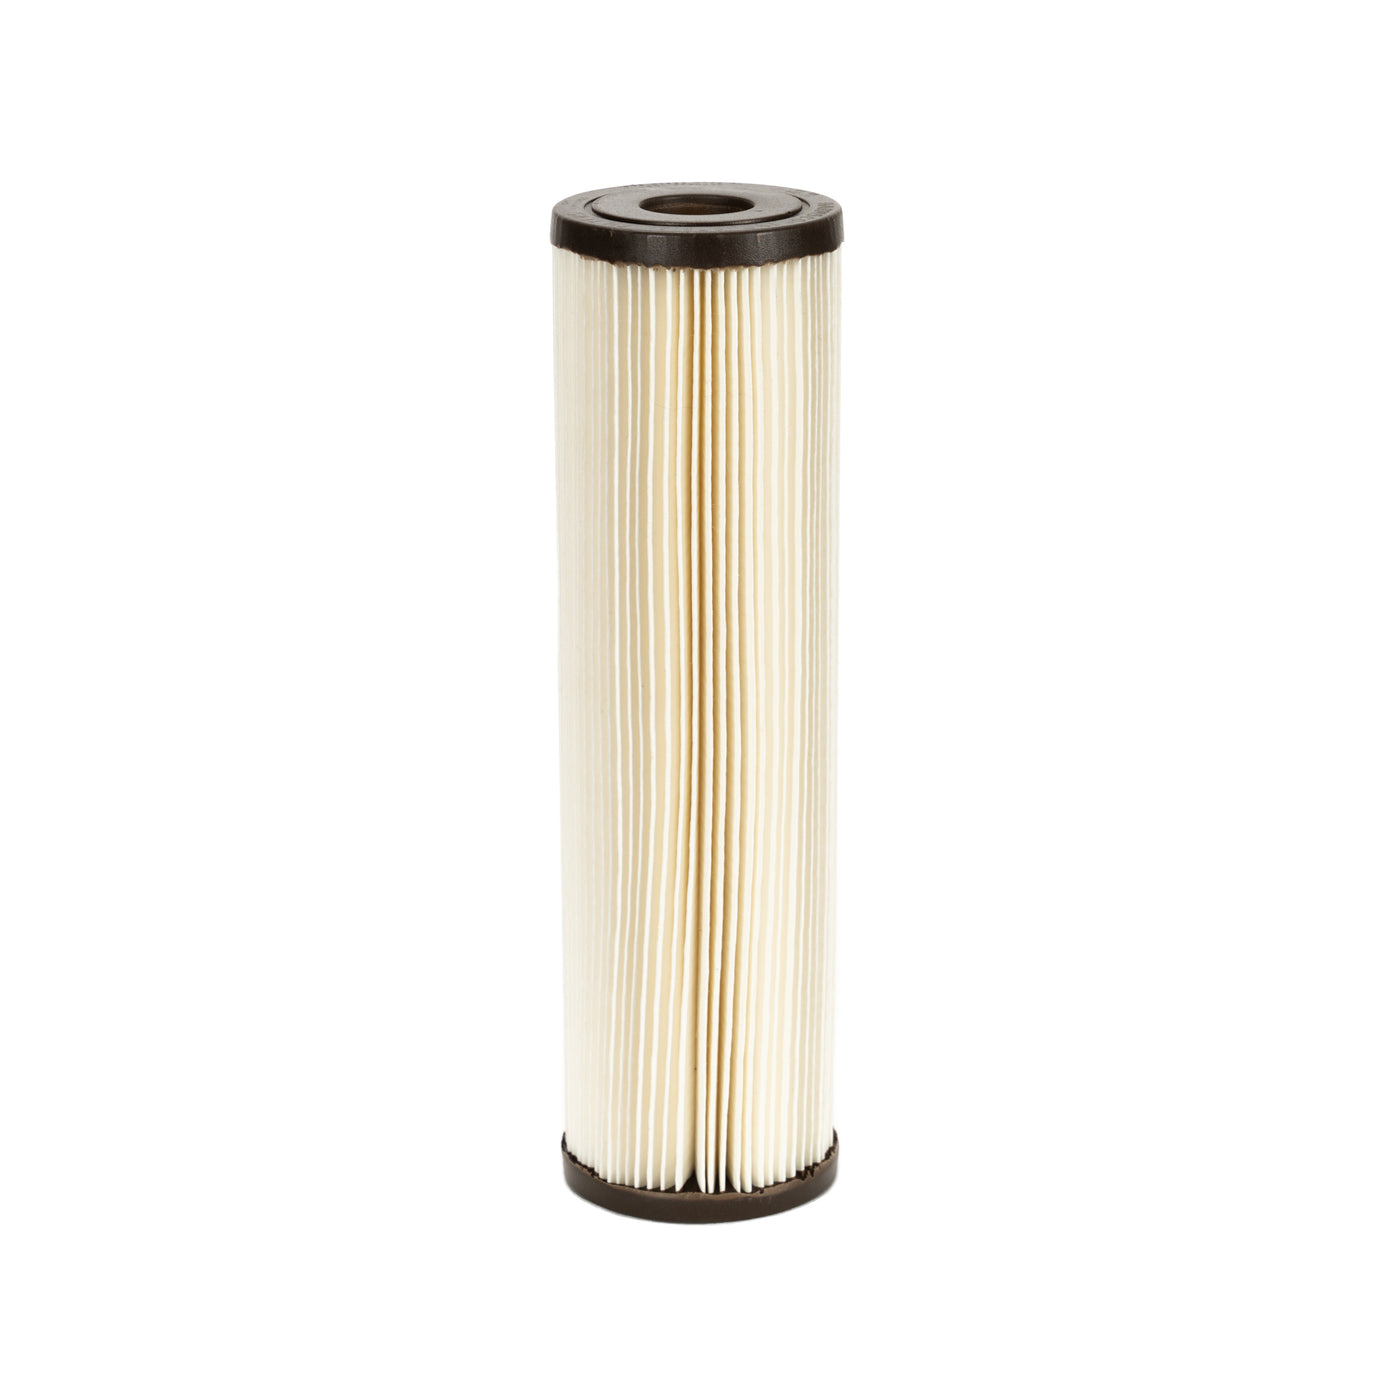 Replacement Sediment Filter for Guzzle H2O Guide Prefilter